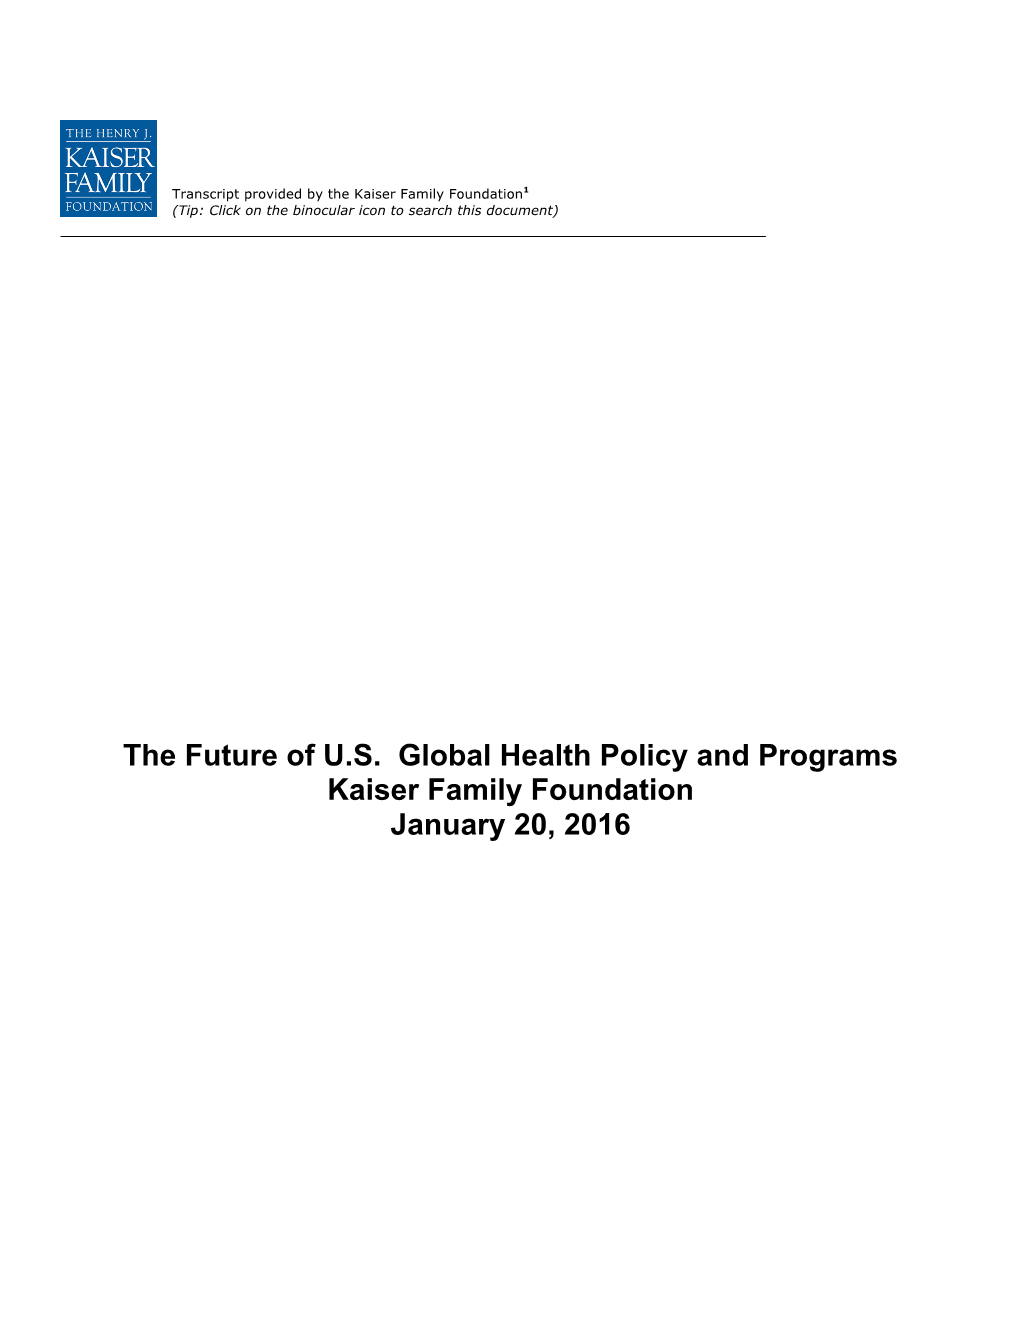 The Future of U.S. Global Health Policy and Programs Kaiser Family Foundation January 20, 2016